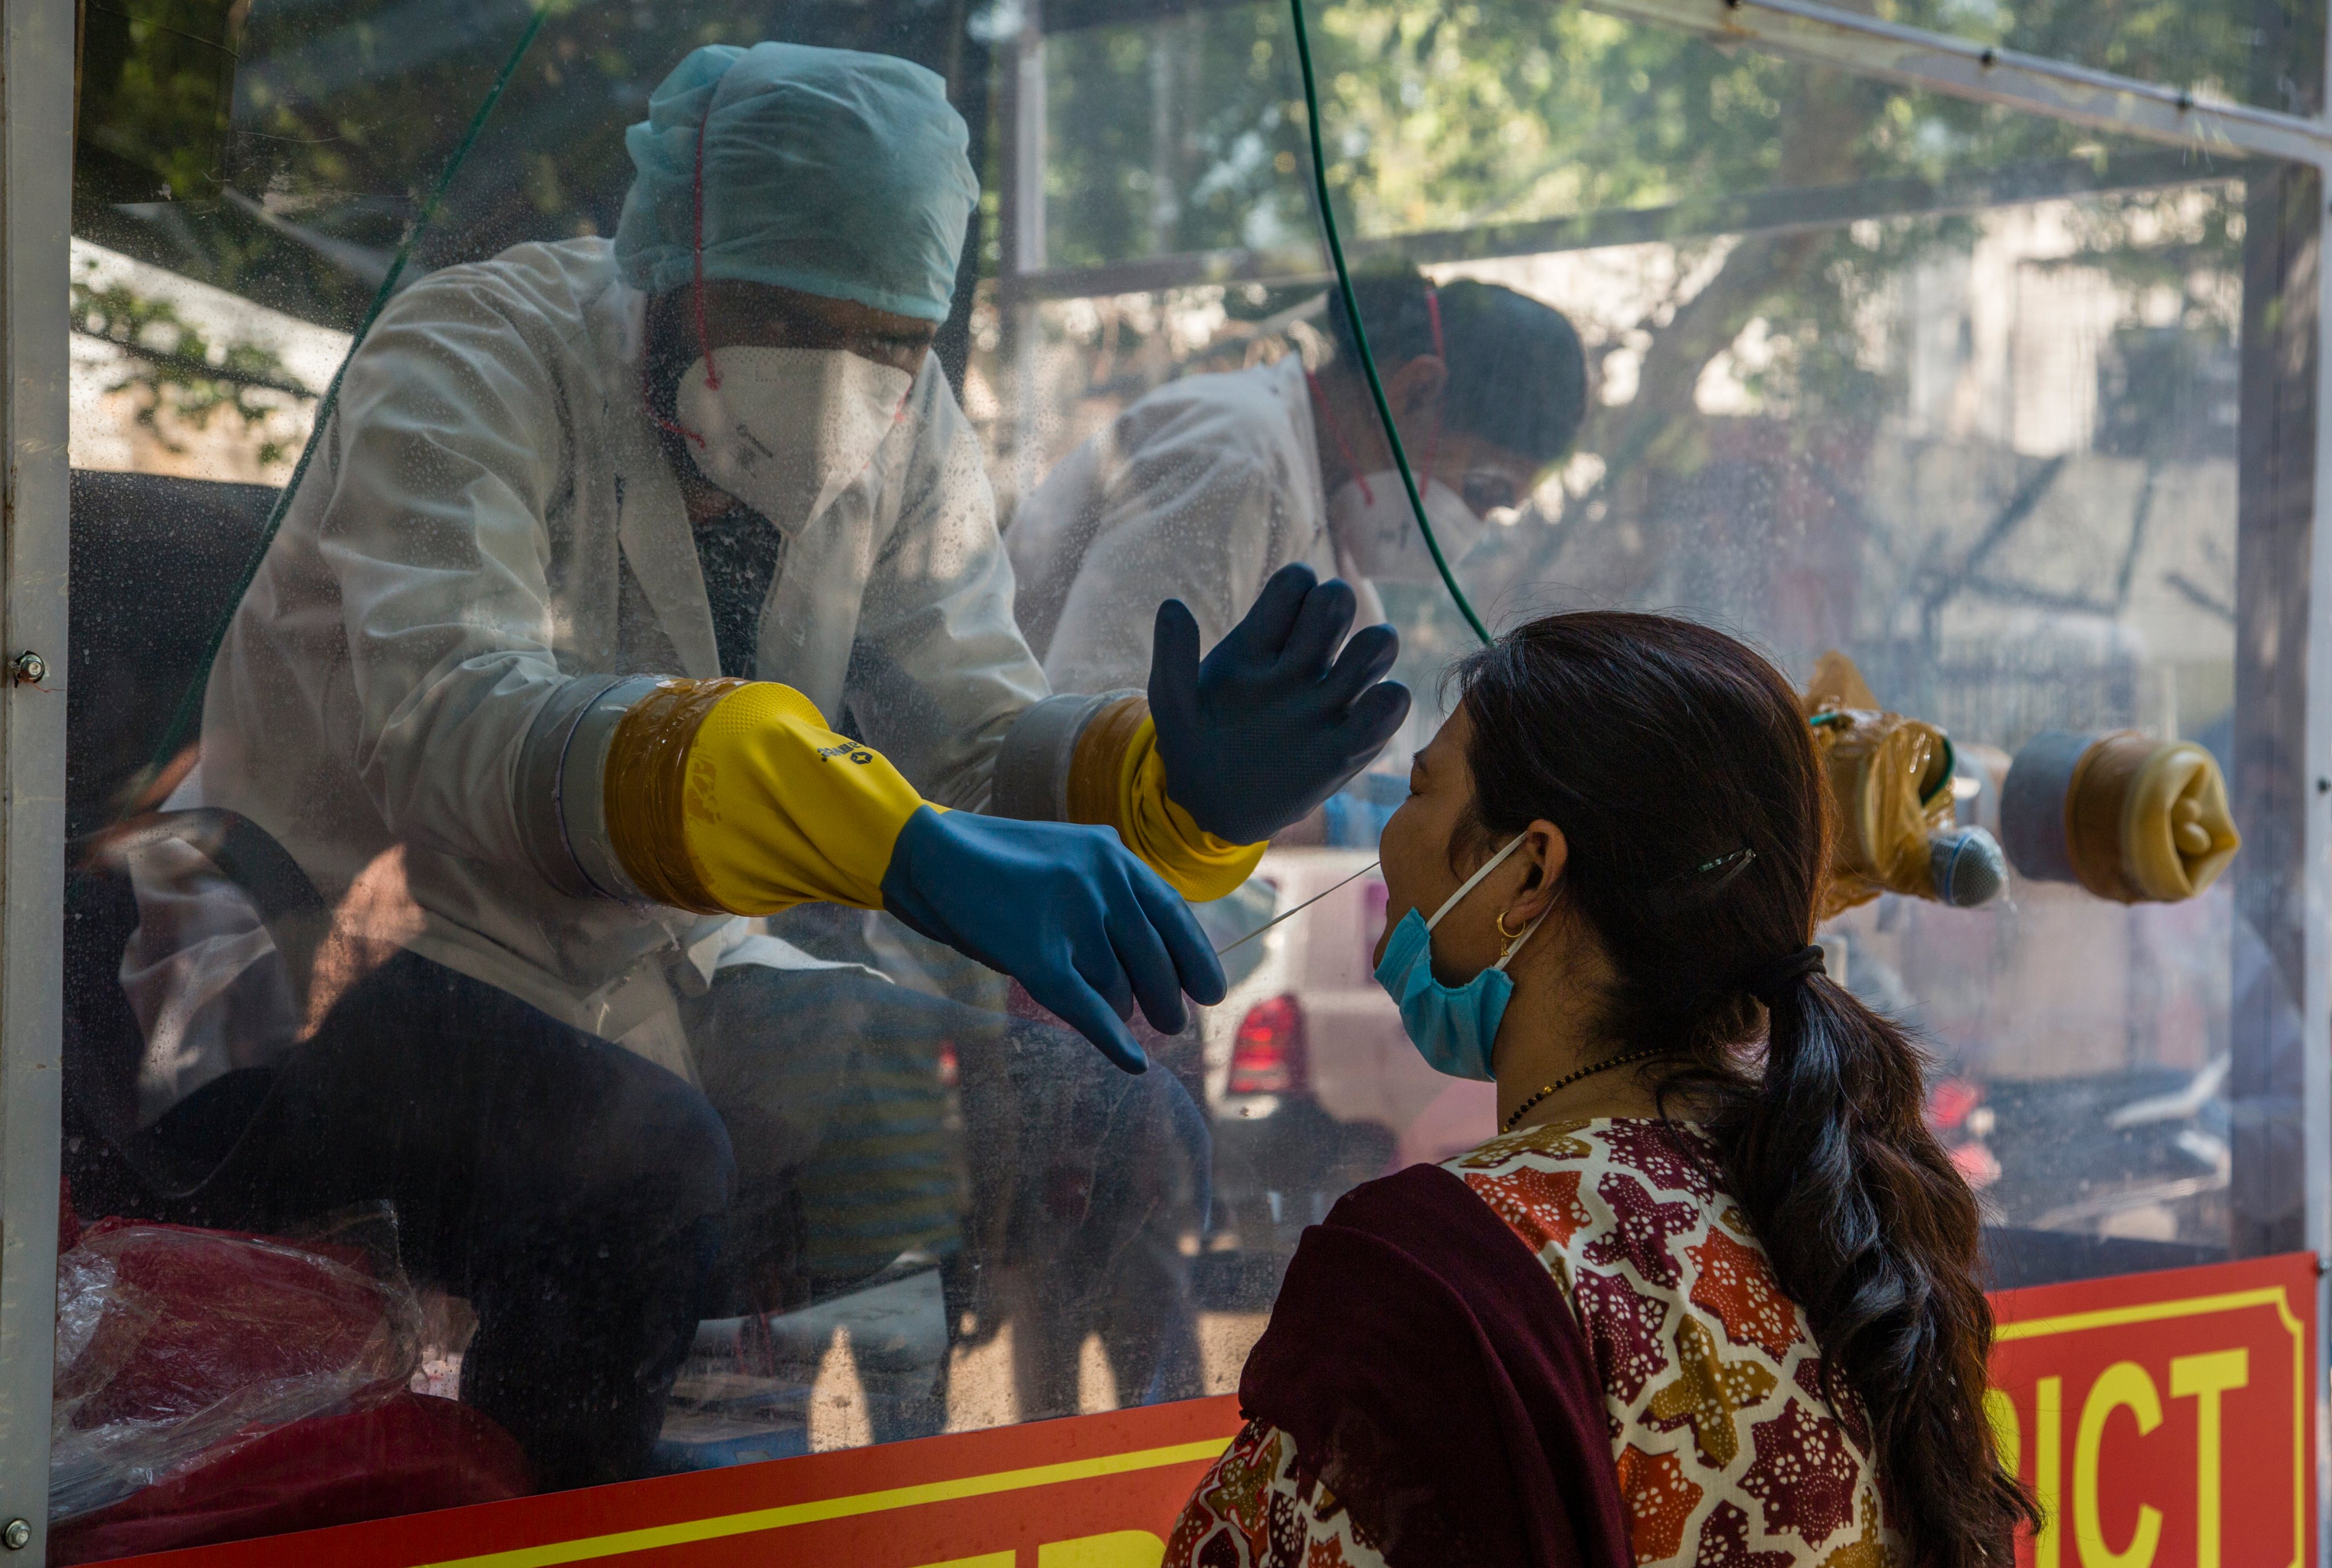 India Imposes Nationwide Lockdown To Contain The Coronavirus Outbreak